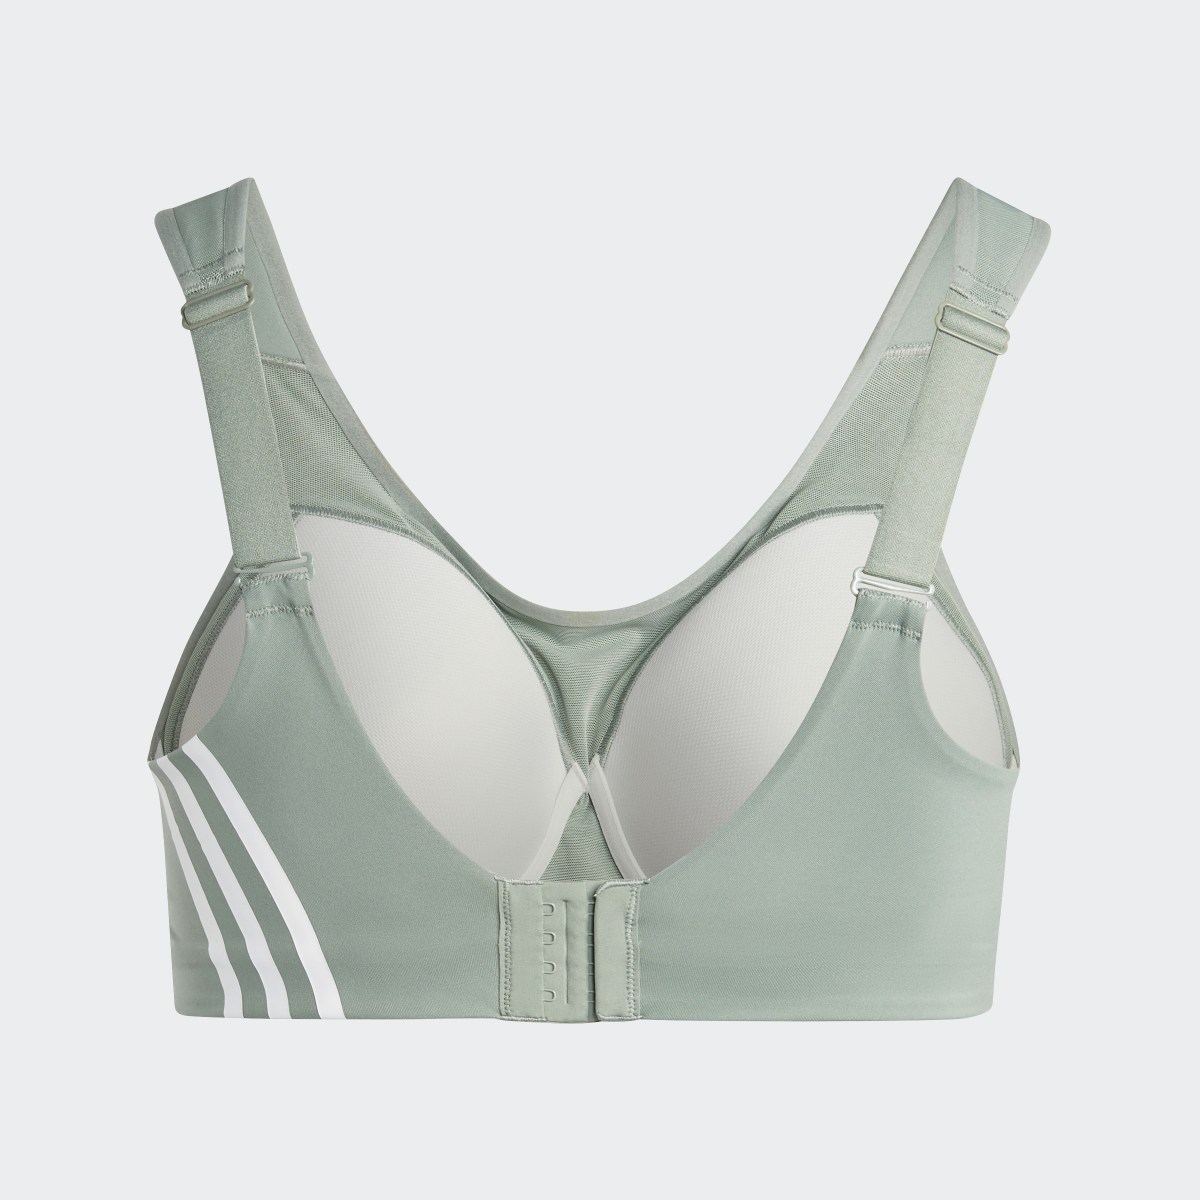 Adidas Brassière adidas TLRD Impact Training Maintien fort (Grandes tailles). 6